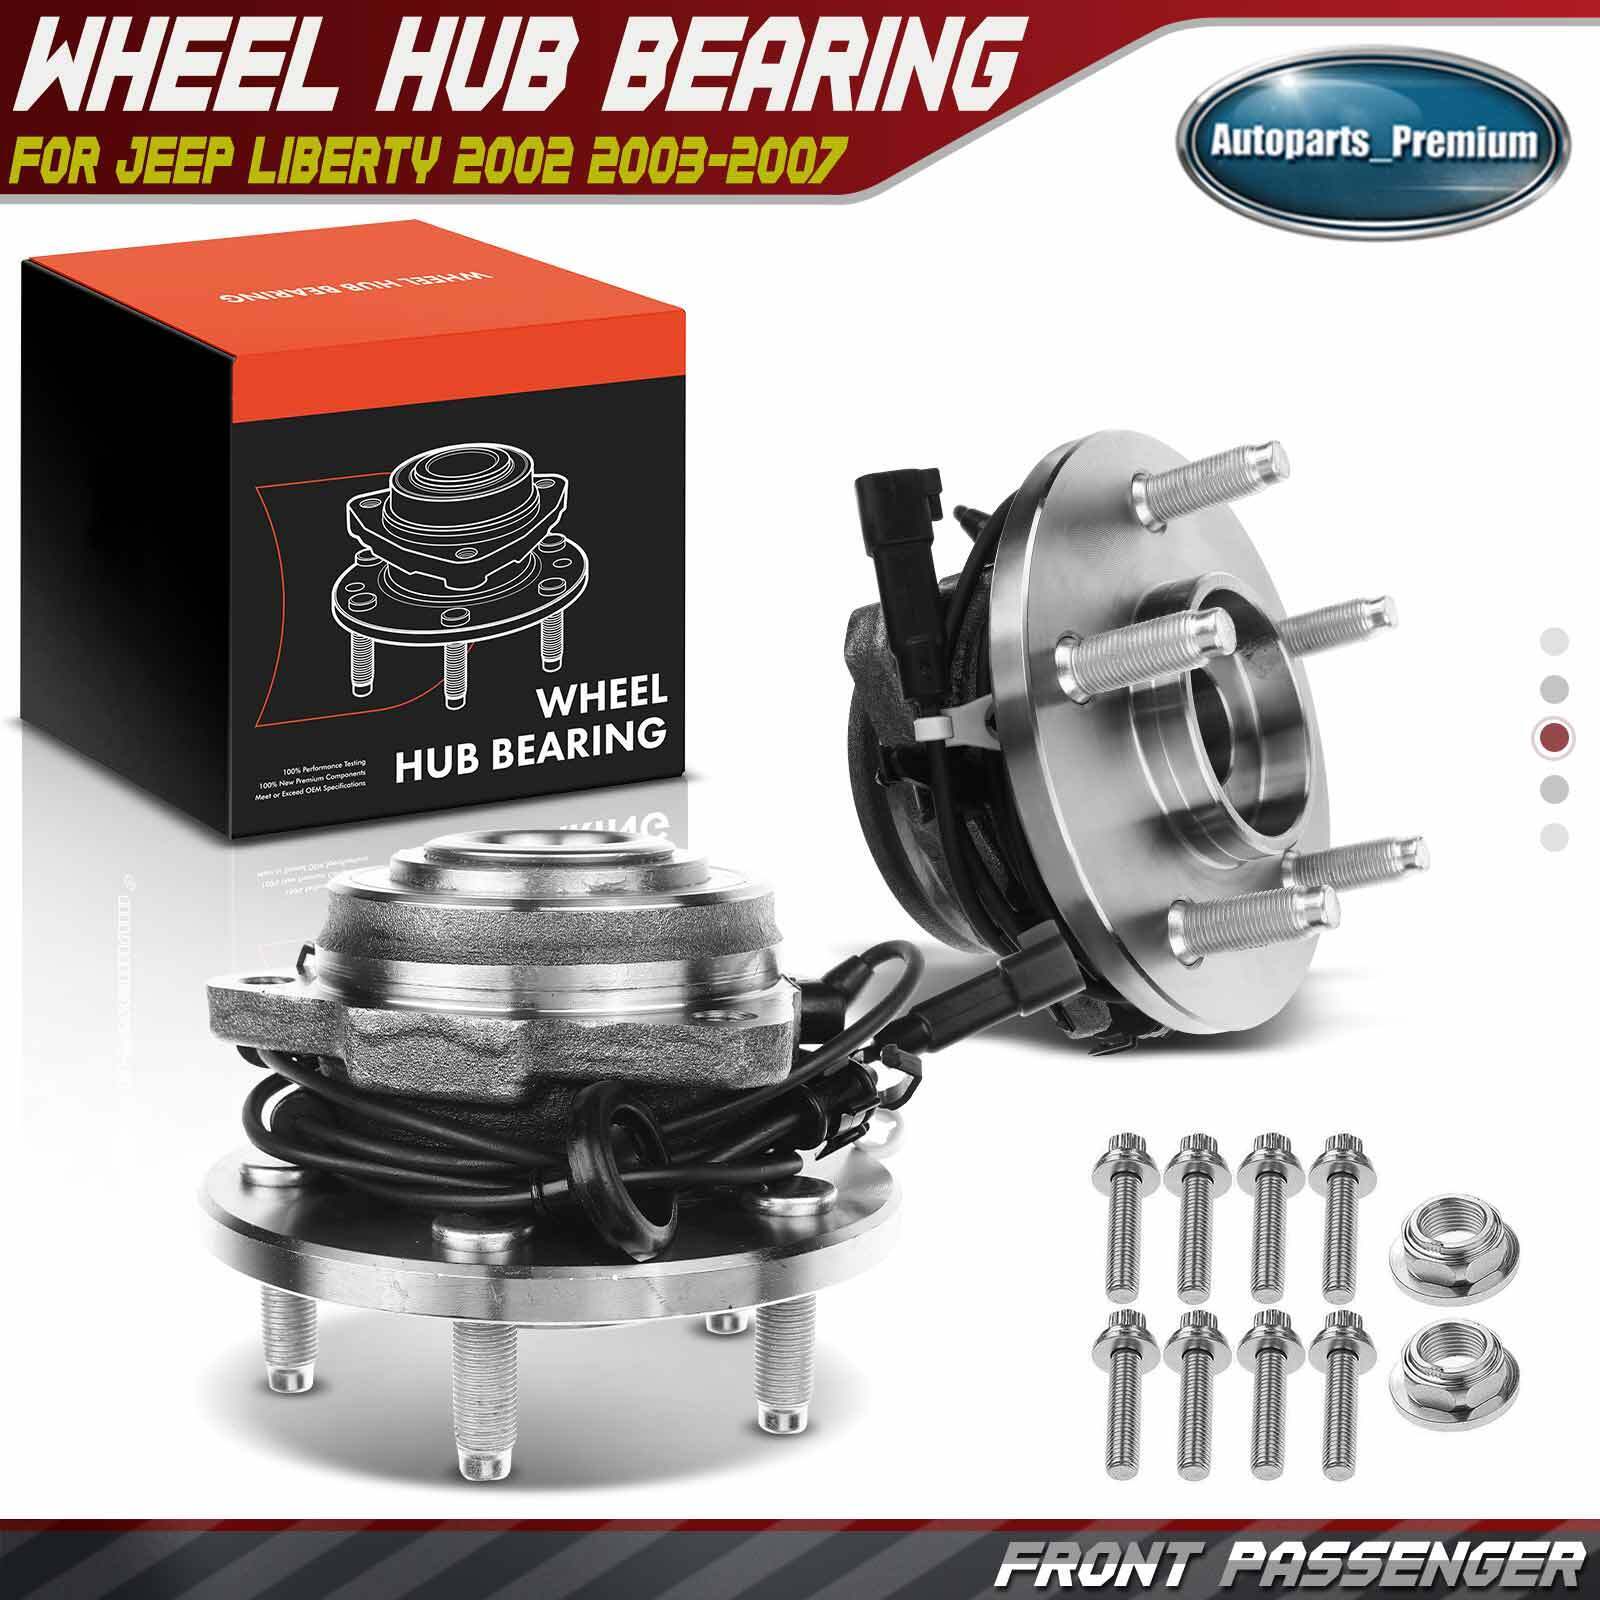 New Front Passenger Right Wheel Hub Bearing Assembly for Jeep Liberty 2002-2007